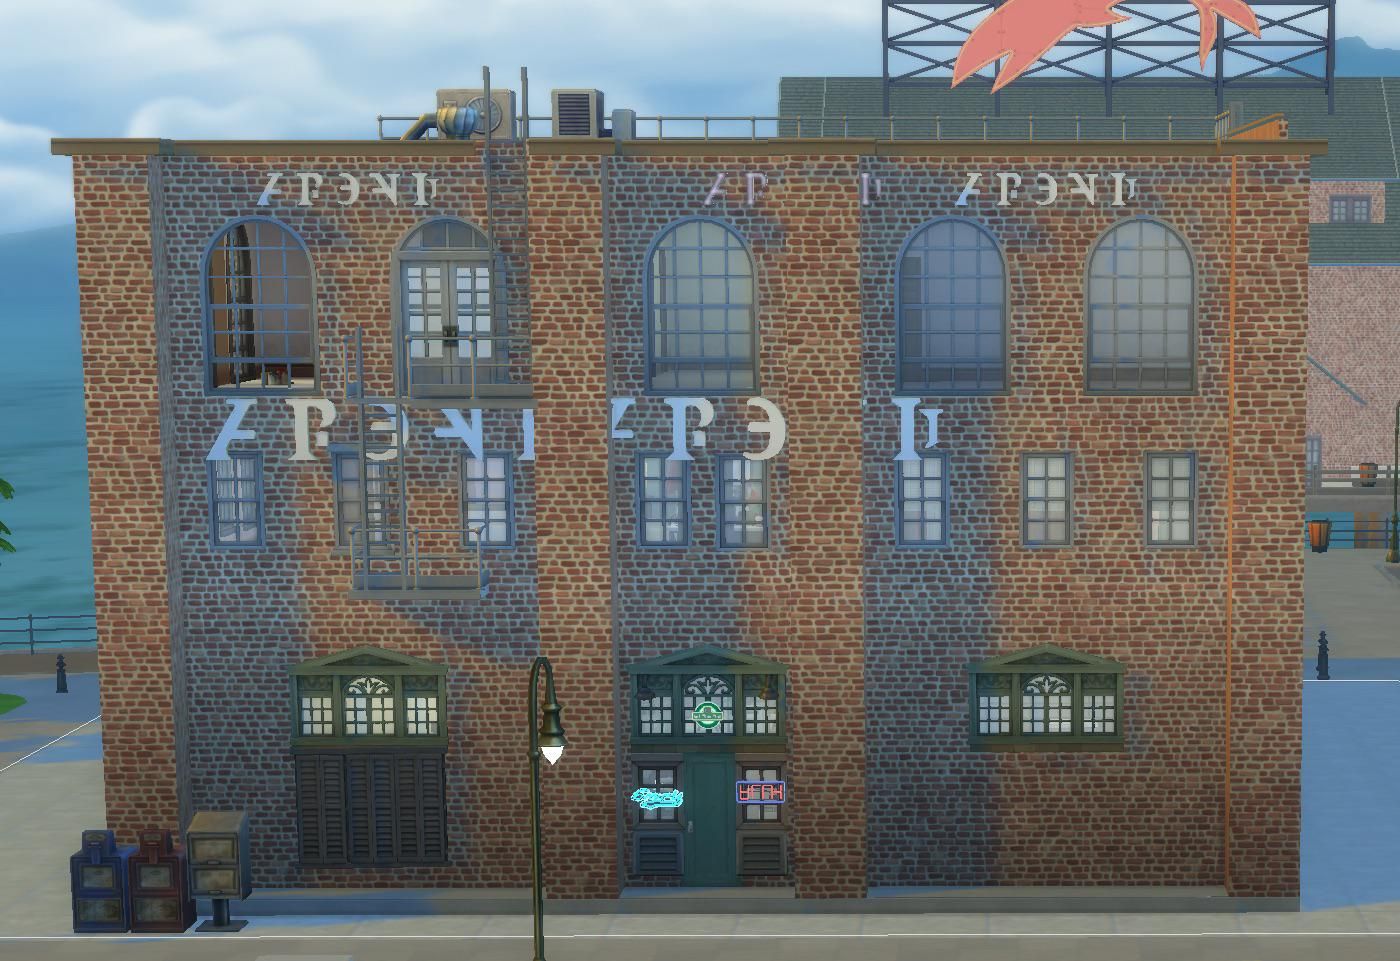 IASIP's Paddy's Pub exterior in The Sims 4.